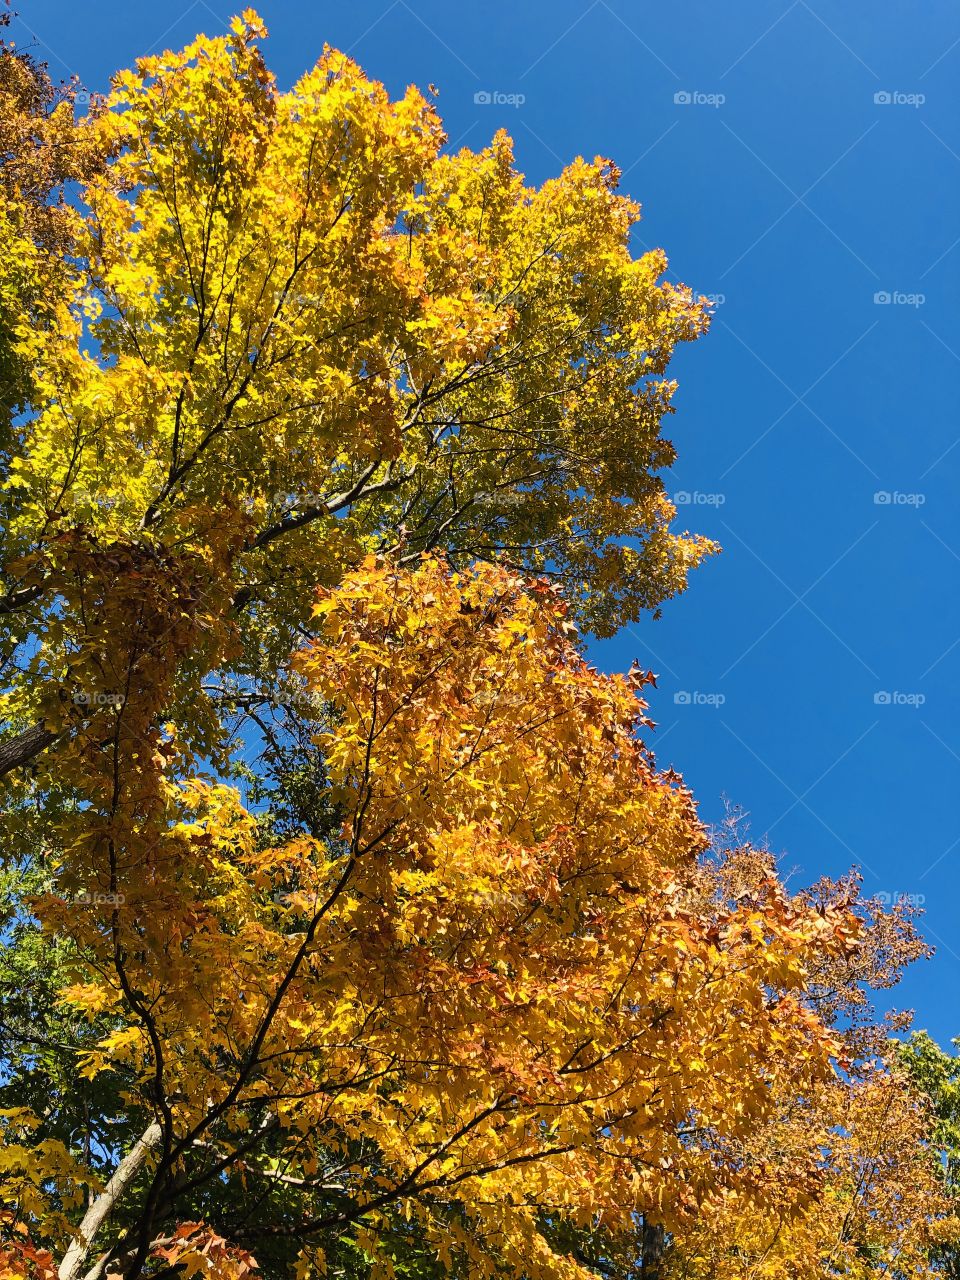 Loving the contrast between the royal blue sky and amber colored leaves on a beautiful fall day in Wisconsin.